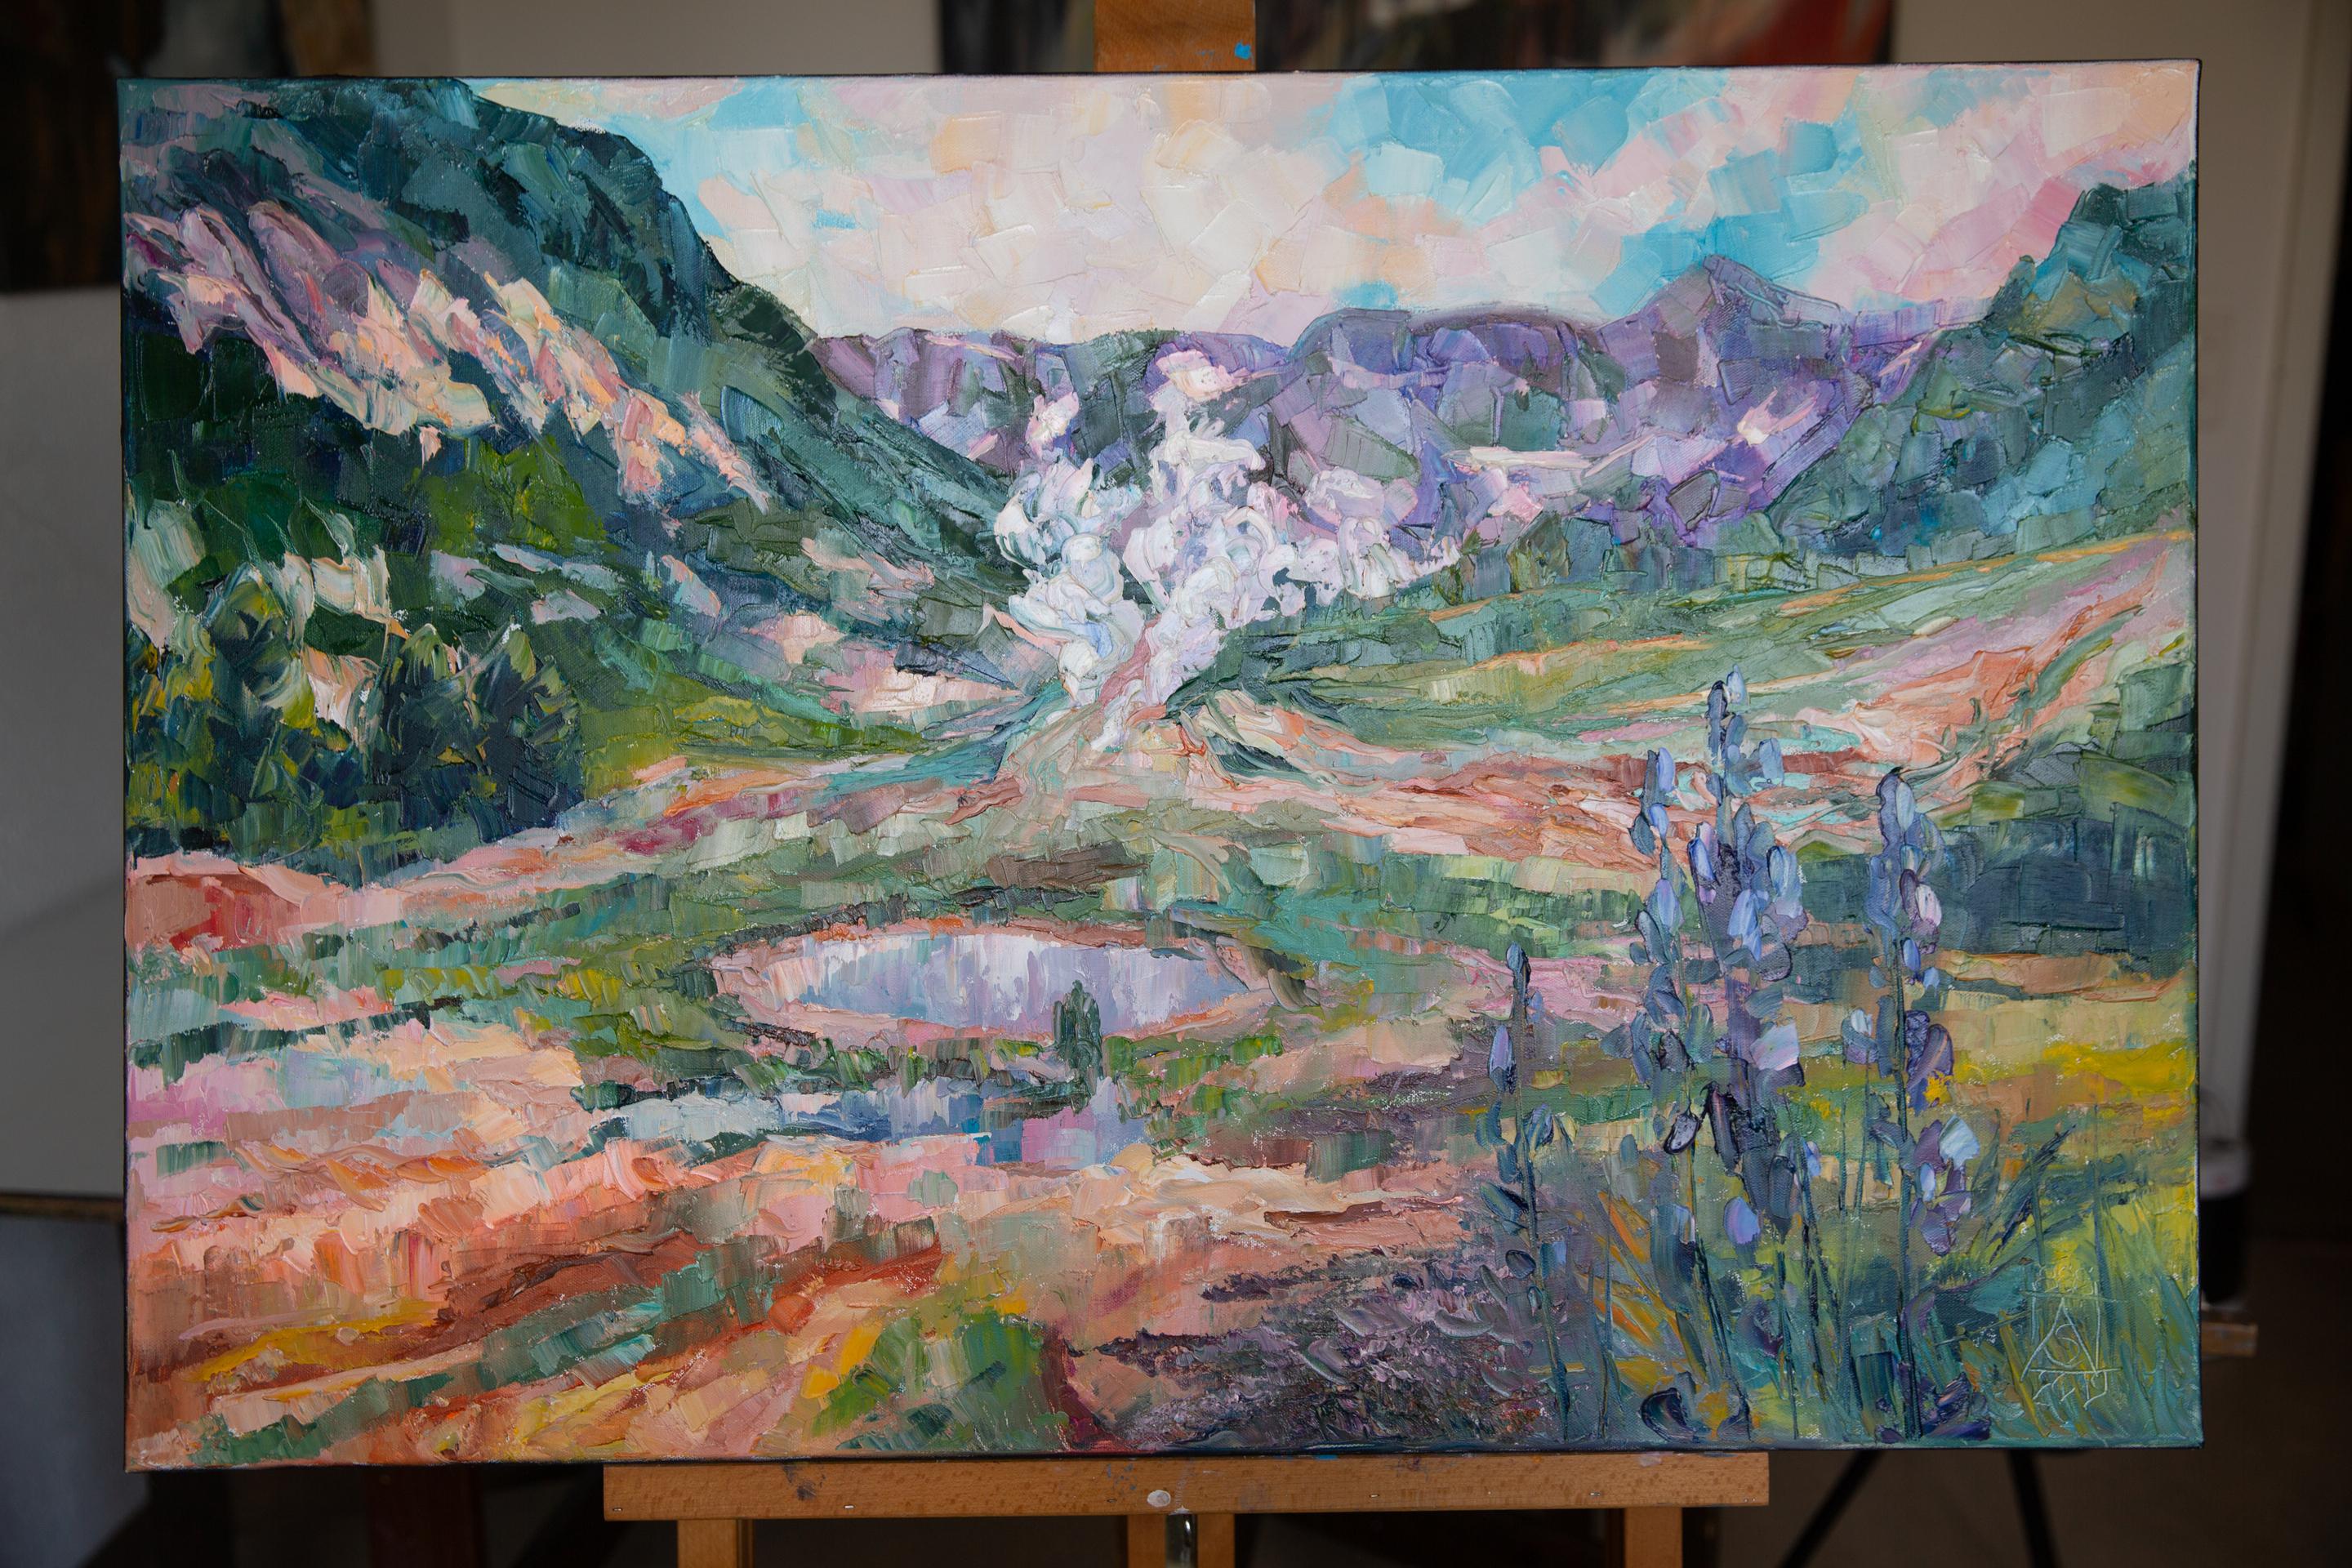 The Valley of Geysers - Post-Impressionist Painting by Anna Shesterikova